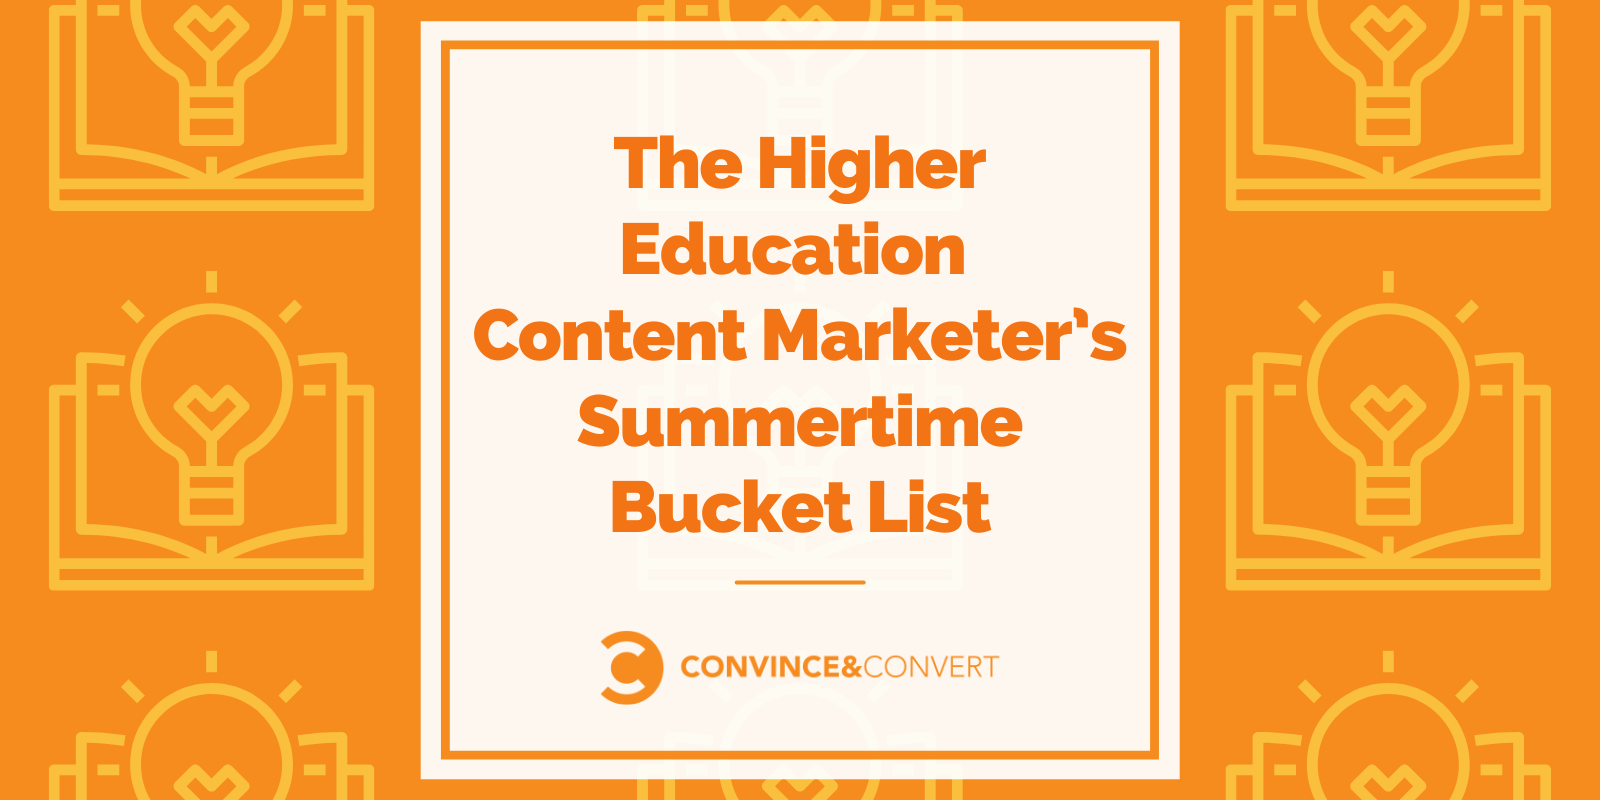 The Elevated Education Hiss material Marketer’s Summertime Bucket List